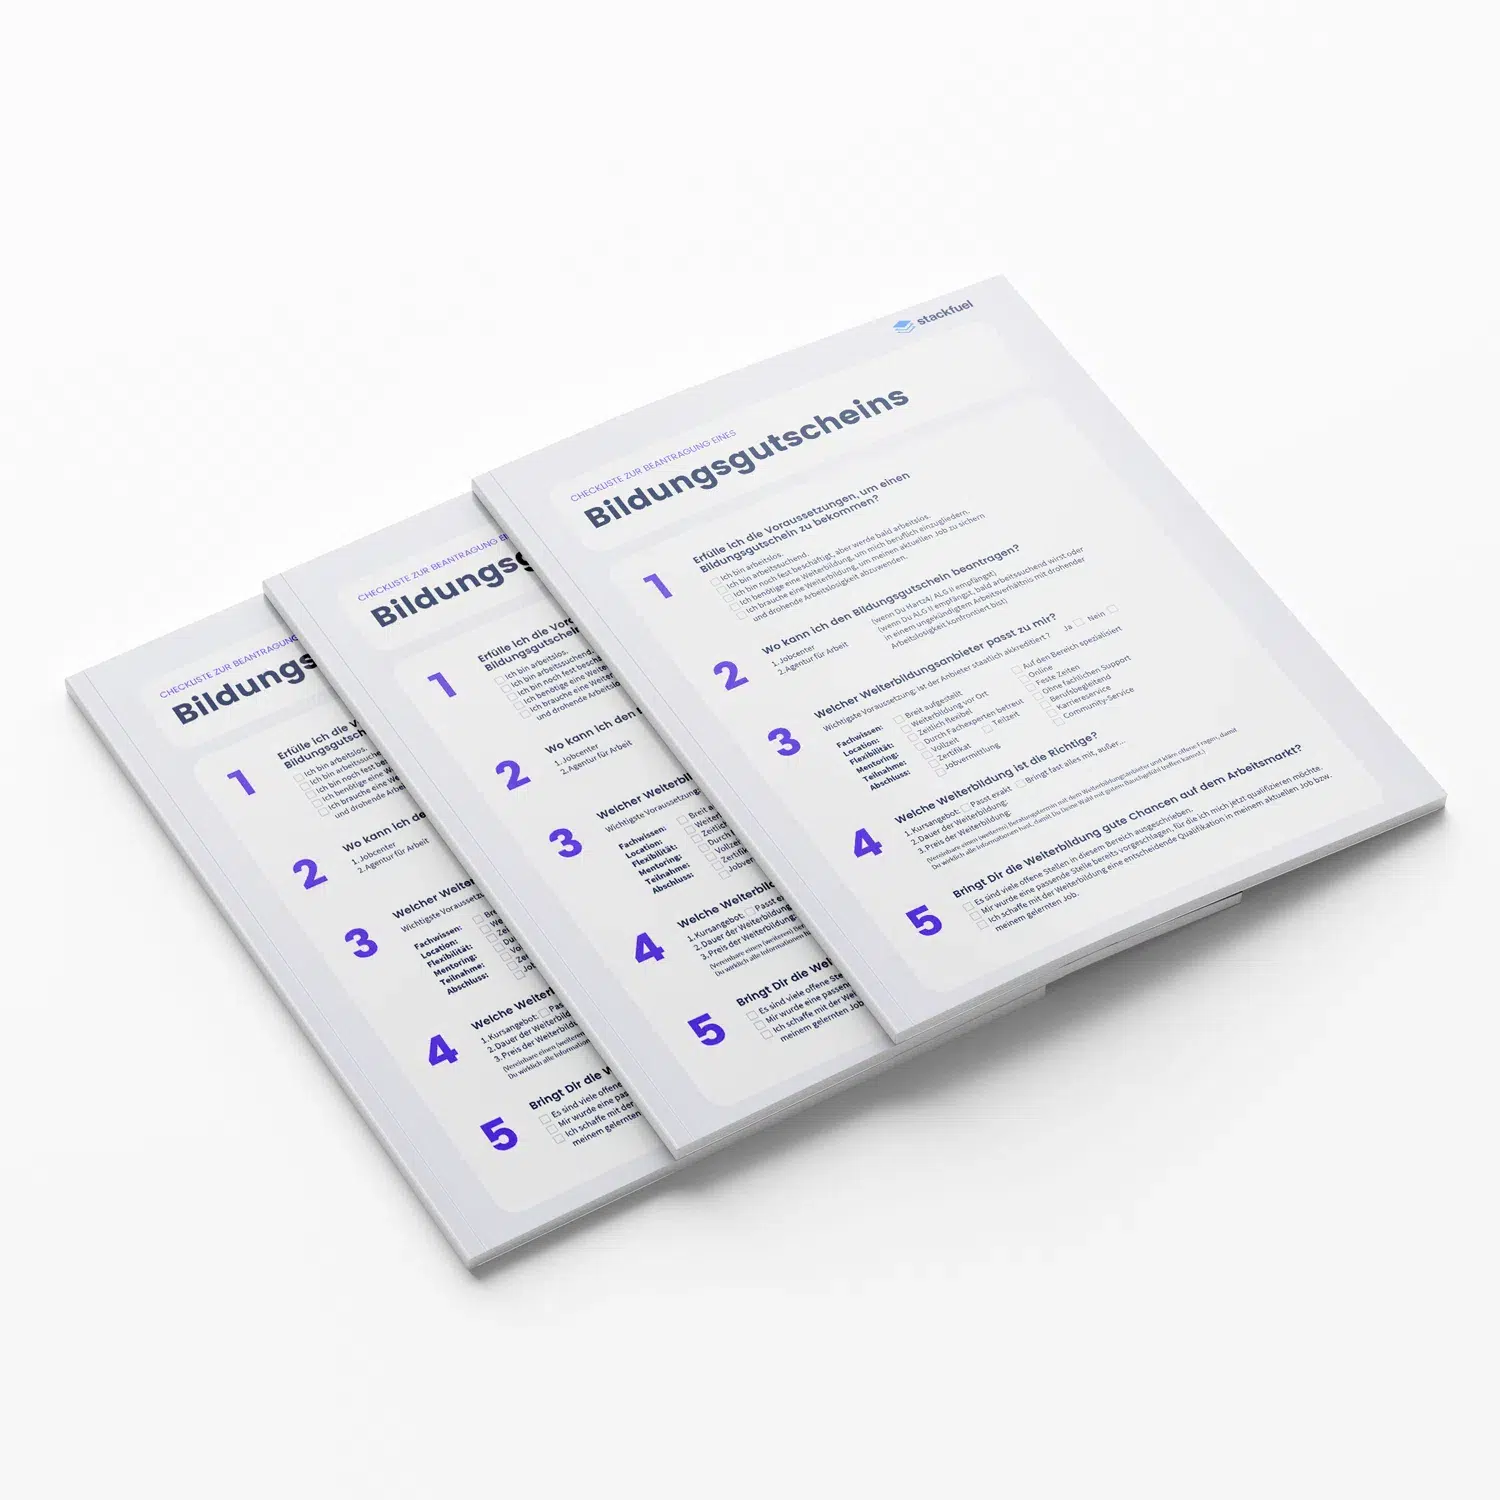 Professional brochure layout on white, featuring clear, structured columns with bullet points and blue accents.